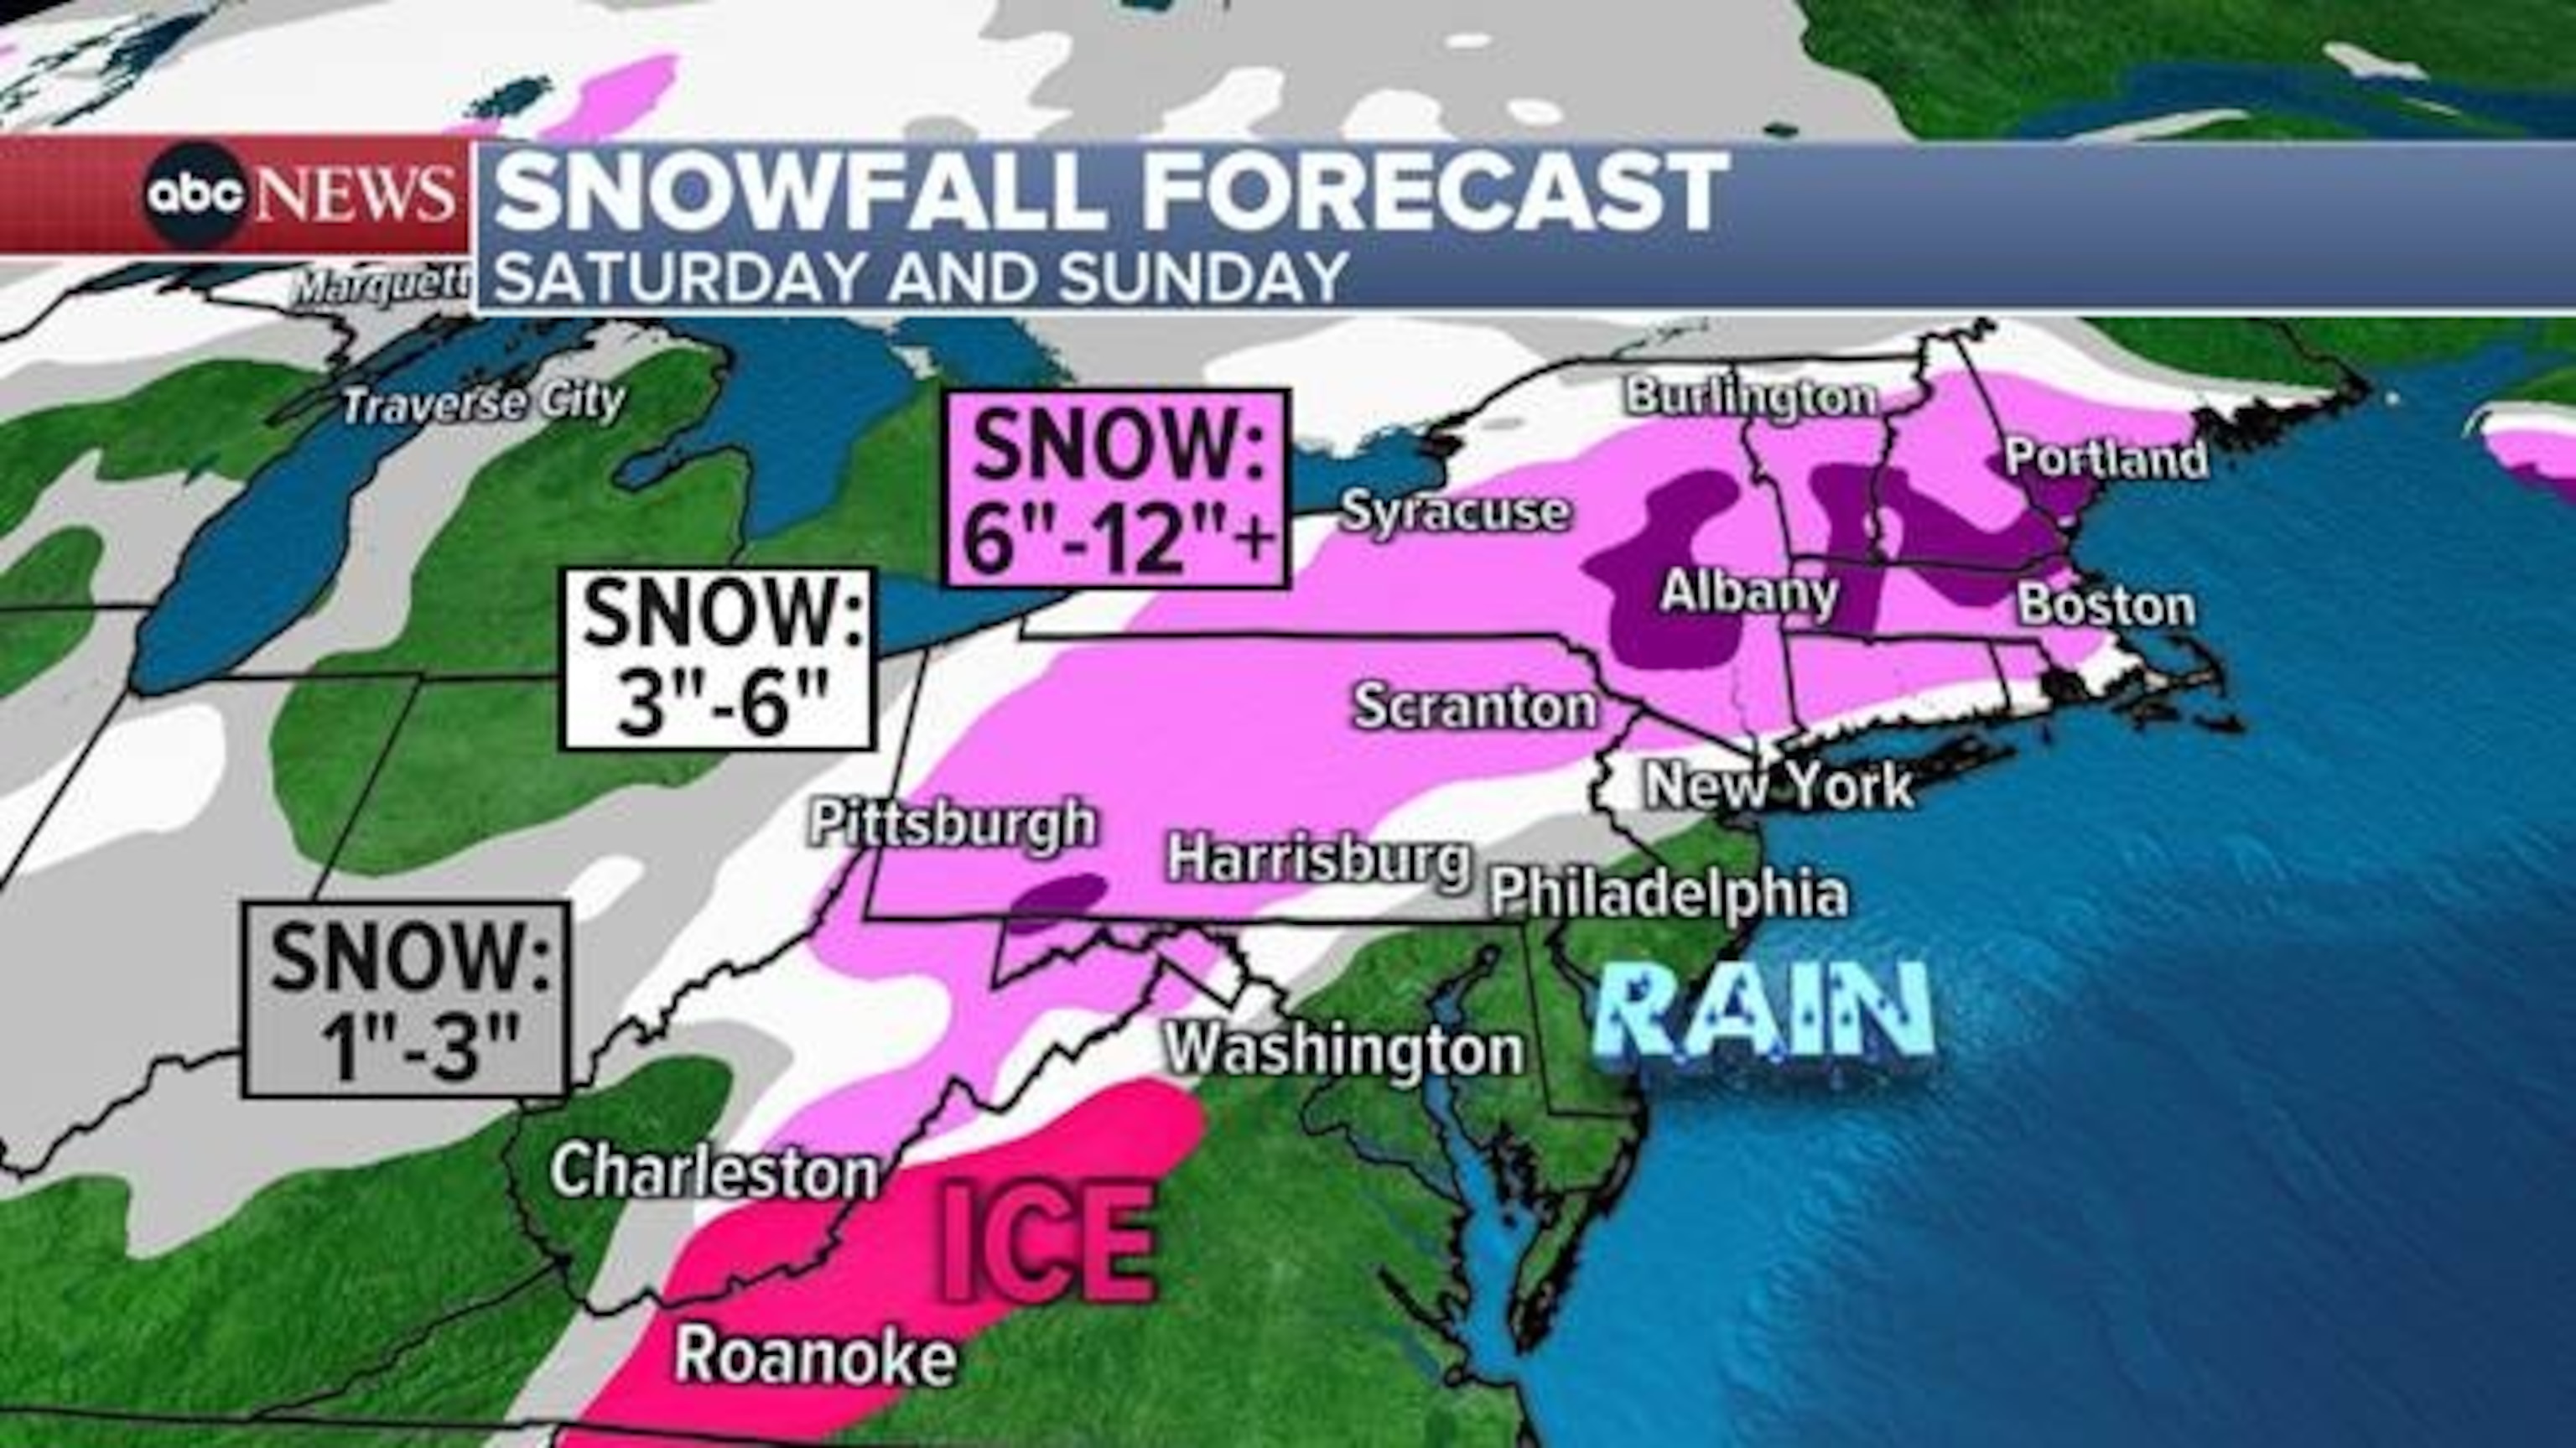 PHOTO: Boston; Albany, New York; and Hartford, Connecticut, could receive over 6 inches of snow, while snow-starved Philadelphia and New York City will likely receive little accumulation.